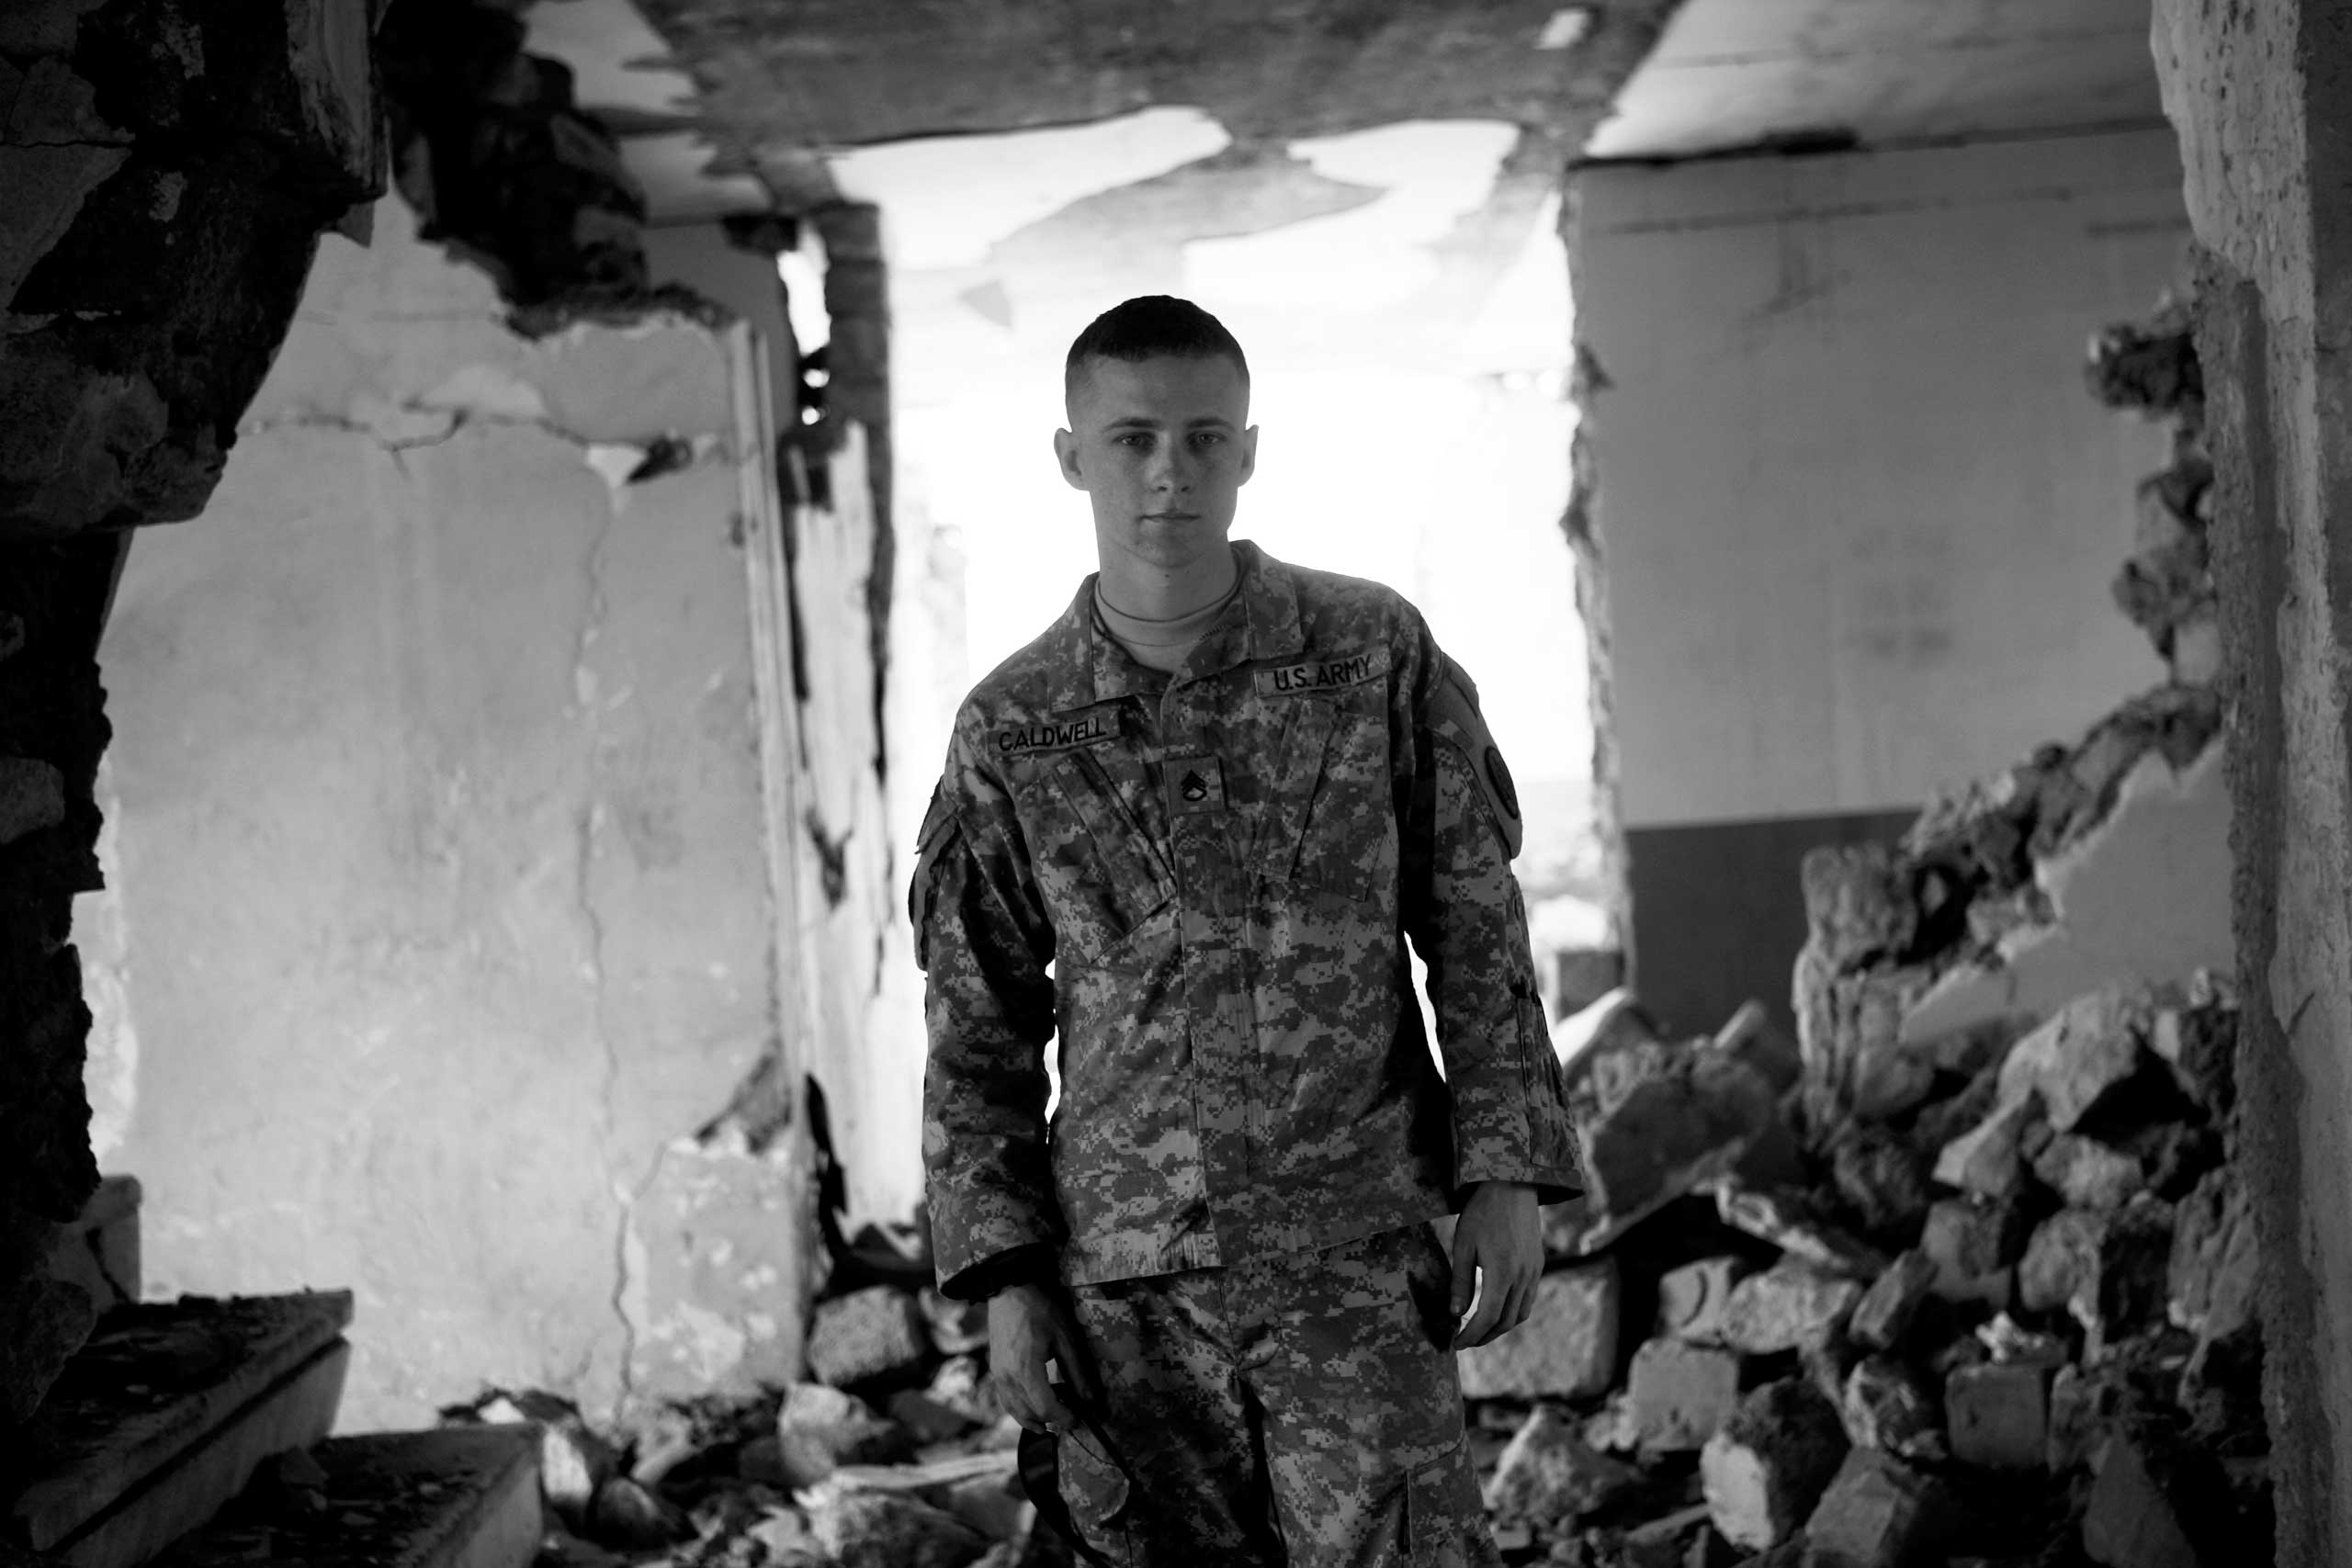 Sergeant Chad Caldwell.Maya Alleruzzo, March 30, 2008. Mosul, Iraq.
                              
                               We wanted to cover the daily lives of soldiers in Iraq’s most dangerous area. We chose Mosul - our stories referred to it then as al-Qaida’s last urban stronghold. On one of the first days living with the platoon, we asked soldiers to show us their good luck charms – the things they carried to keep them safe, grounded, connected.
                              
                              Staff Sergeant Chad Caldwell had nothing in his pockets but was eager to talk. 'I am my own good luck charm,' he said. 'I am what keeps me alive. They’ve tried to blow me up, shoot me, throw hand grenades at me, everything they can throw at me. This far I have walked away without a scratch on me, knock on wood.' Then he smirked. 'I am Superman. I cannot be defeated. I am invincible.'
                              
                              Now it was time for a portrait. He stepped into the center of the room in the partially destroyed building we were using as a studio.
                              
                              He was slight, wiry – barely taller than me.  But he stood tall. He looked like a boy, barely old enough to shave, but he’d fought in Iraq three times. He gazed into my lens as the sun filtered through the rubble, backlighting him. He looked, in this light, in this place, like a ghost. I drew in my breath and pressed the shutter.
                              
                              He was killed exactly one month later by a bomb during a foot patrol. His death shook me. Sometimes, irrationally, I still worry that this photograph, or talking to him about his invincibility, was the thing that broke his lucky streak.